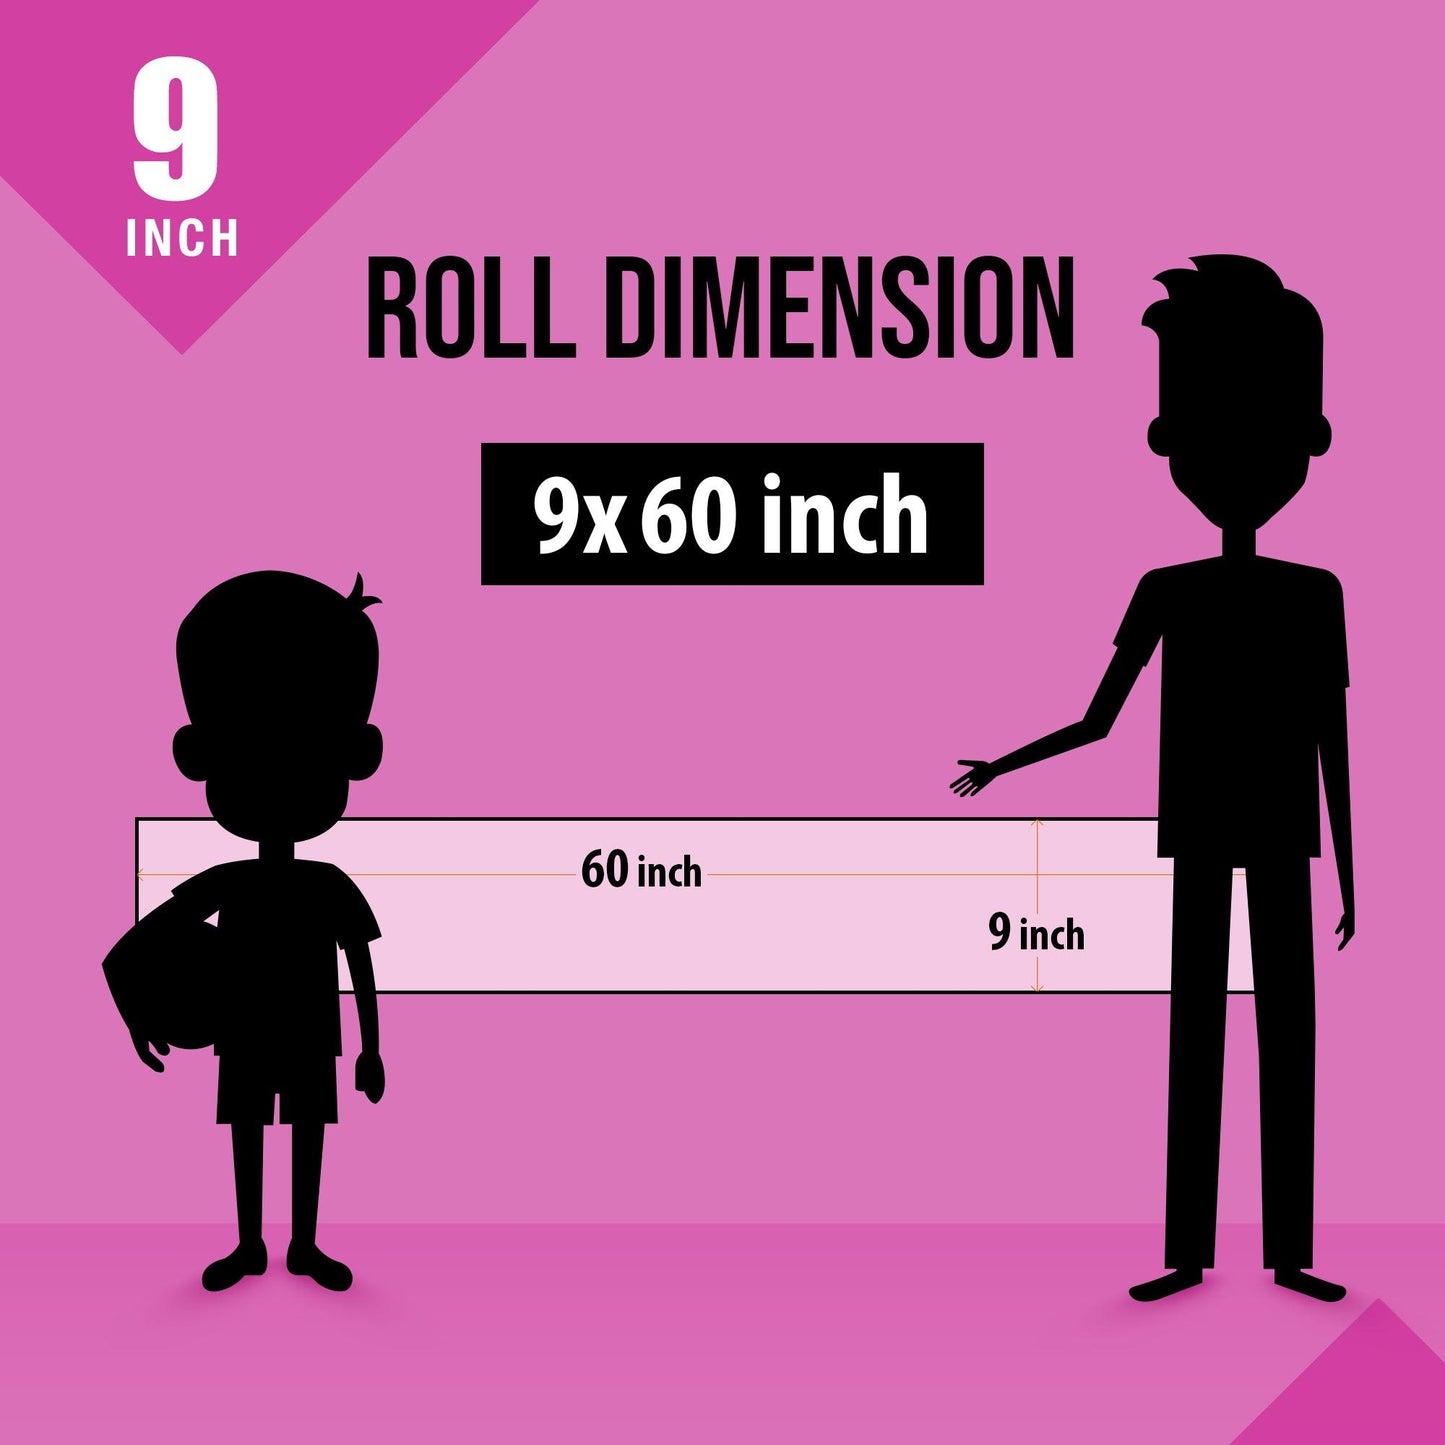 The image depicts a blue background with a ruler showing a child's height next to a 9*60 inches paper roll attached to the wall, alongside a picture of a box dimension.